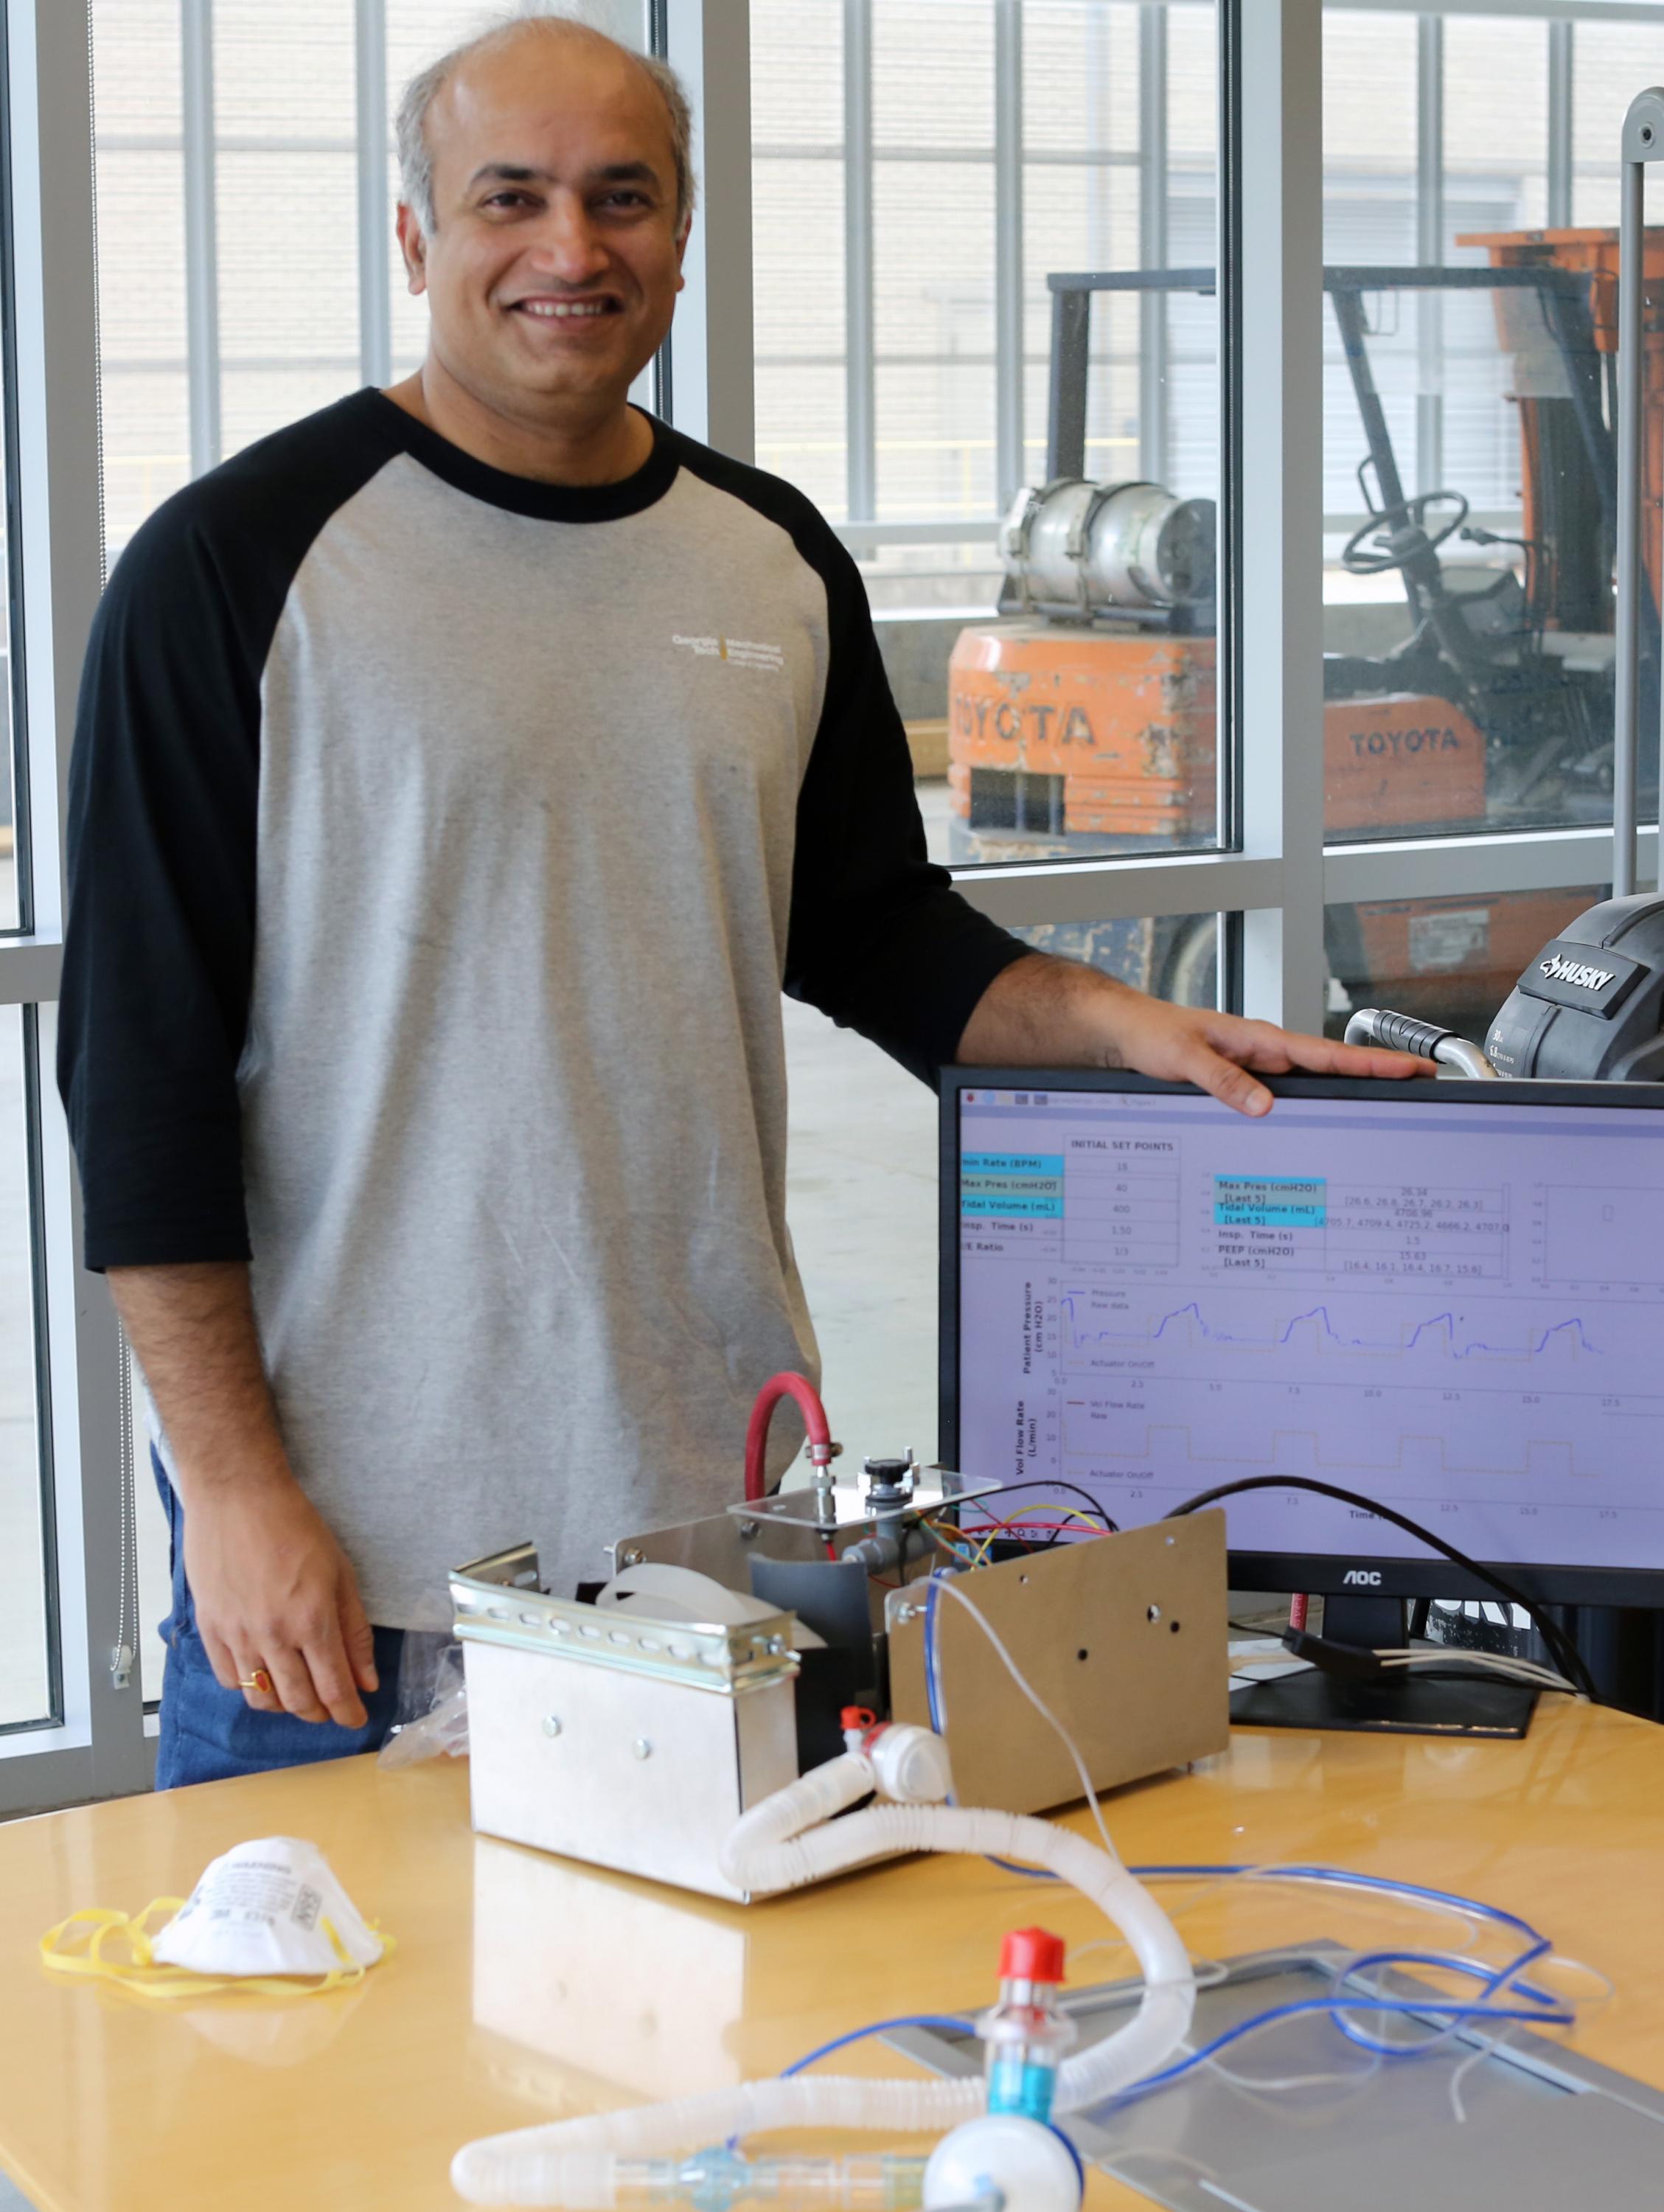 Devesh Ranjan, a professor in Georgia Tech’s George W. Woodruff School of Mechanical Engineering, is shown with the Open-AirVentGT, a low-cost, portable emergency ventilator that uses electronic sensors and computer control to manage key clinical parameters. (Credit: Ben Wright, Georgia Tech)